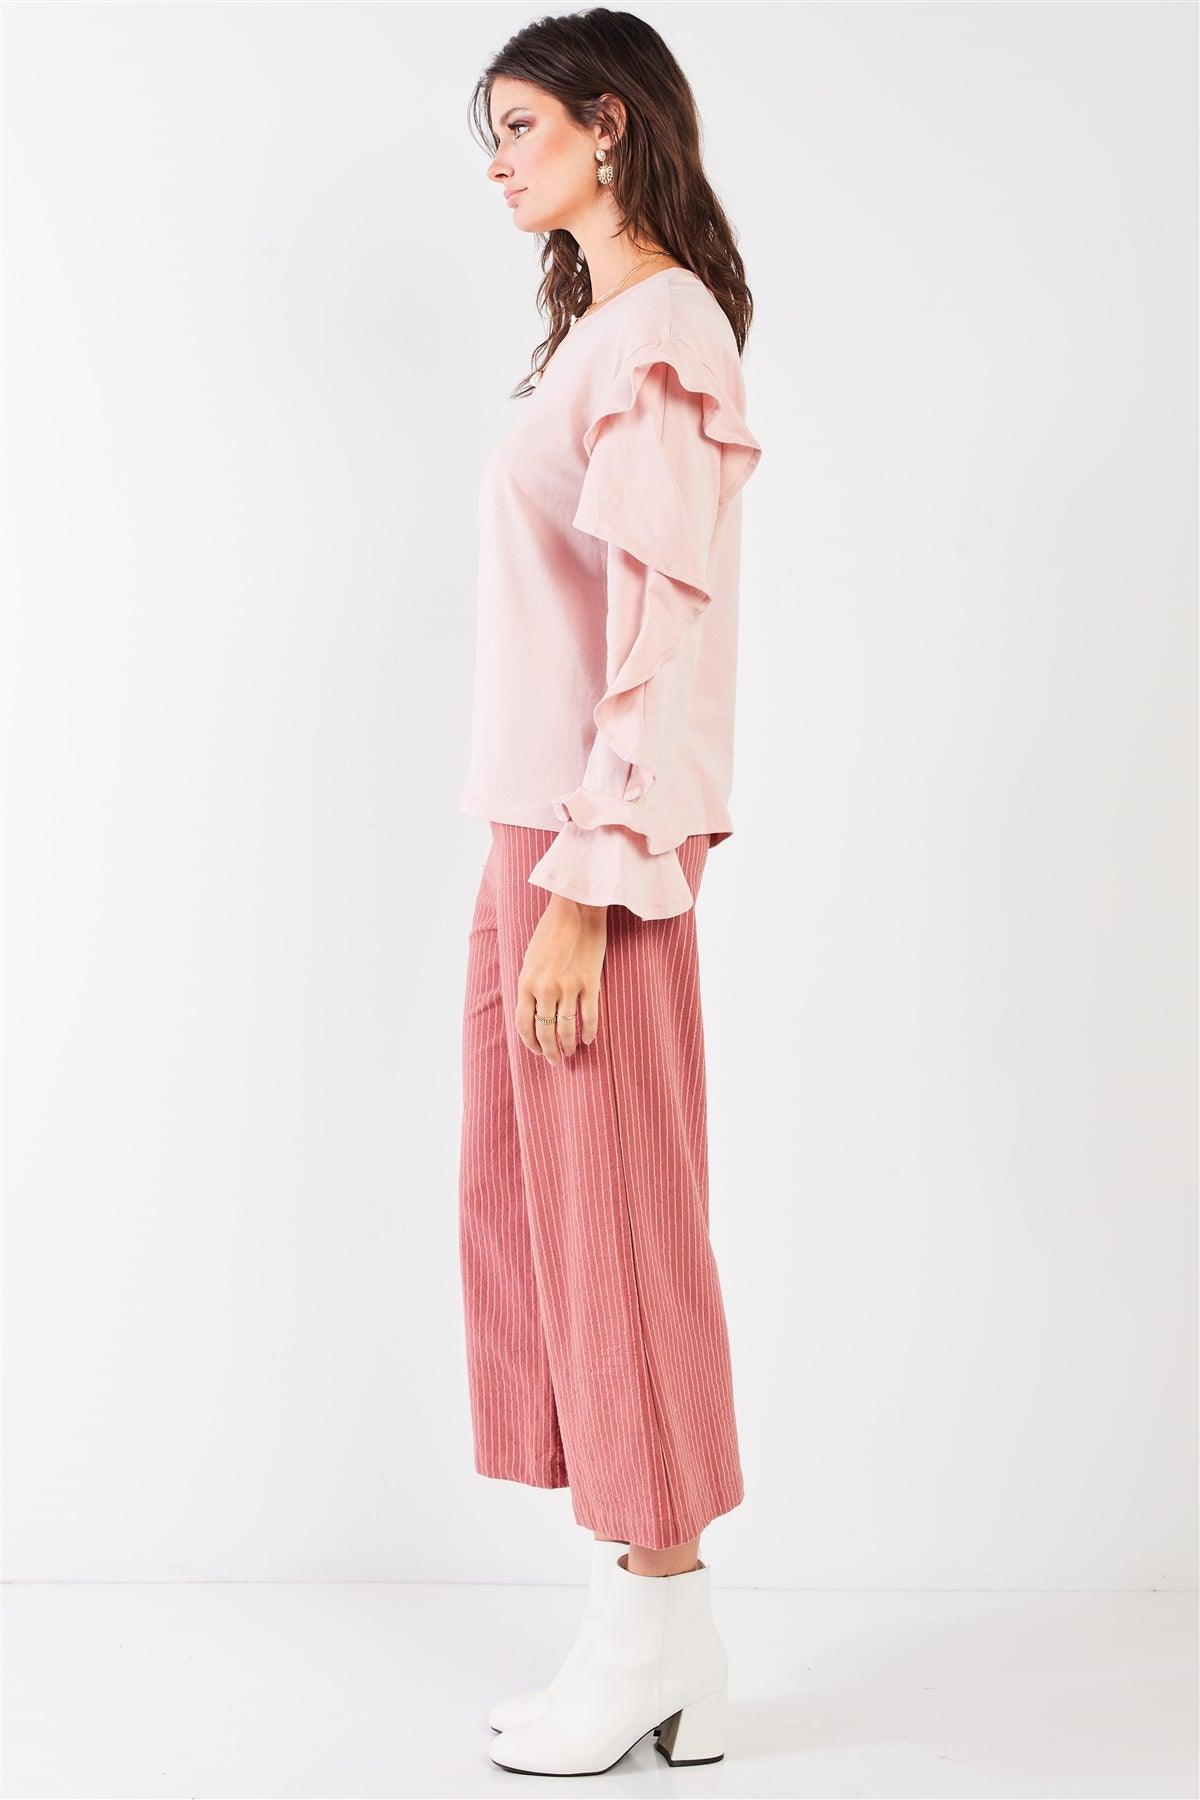 Tender Pink Petal Ruffle Long Sleeve Round Neck Relaxed Top /3-1-2